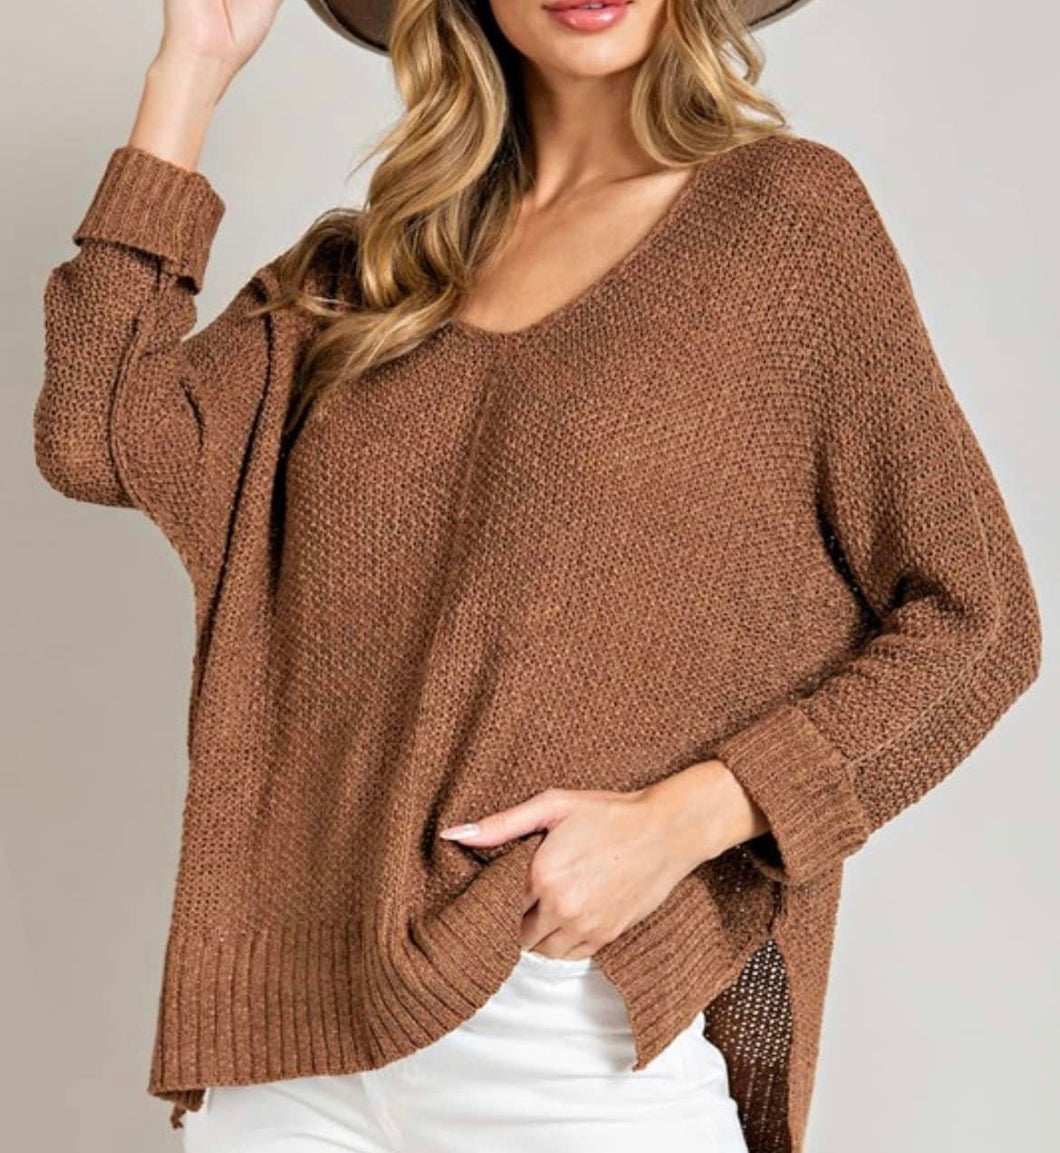 Our fav open knit sweater - Coco